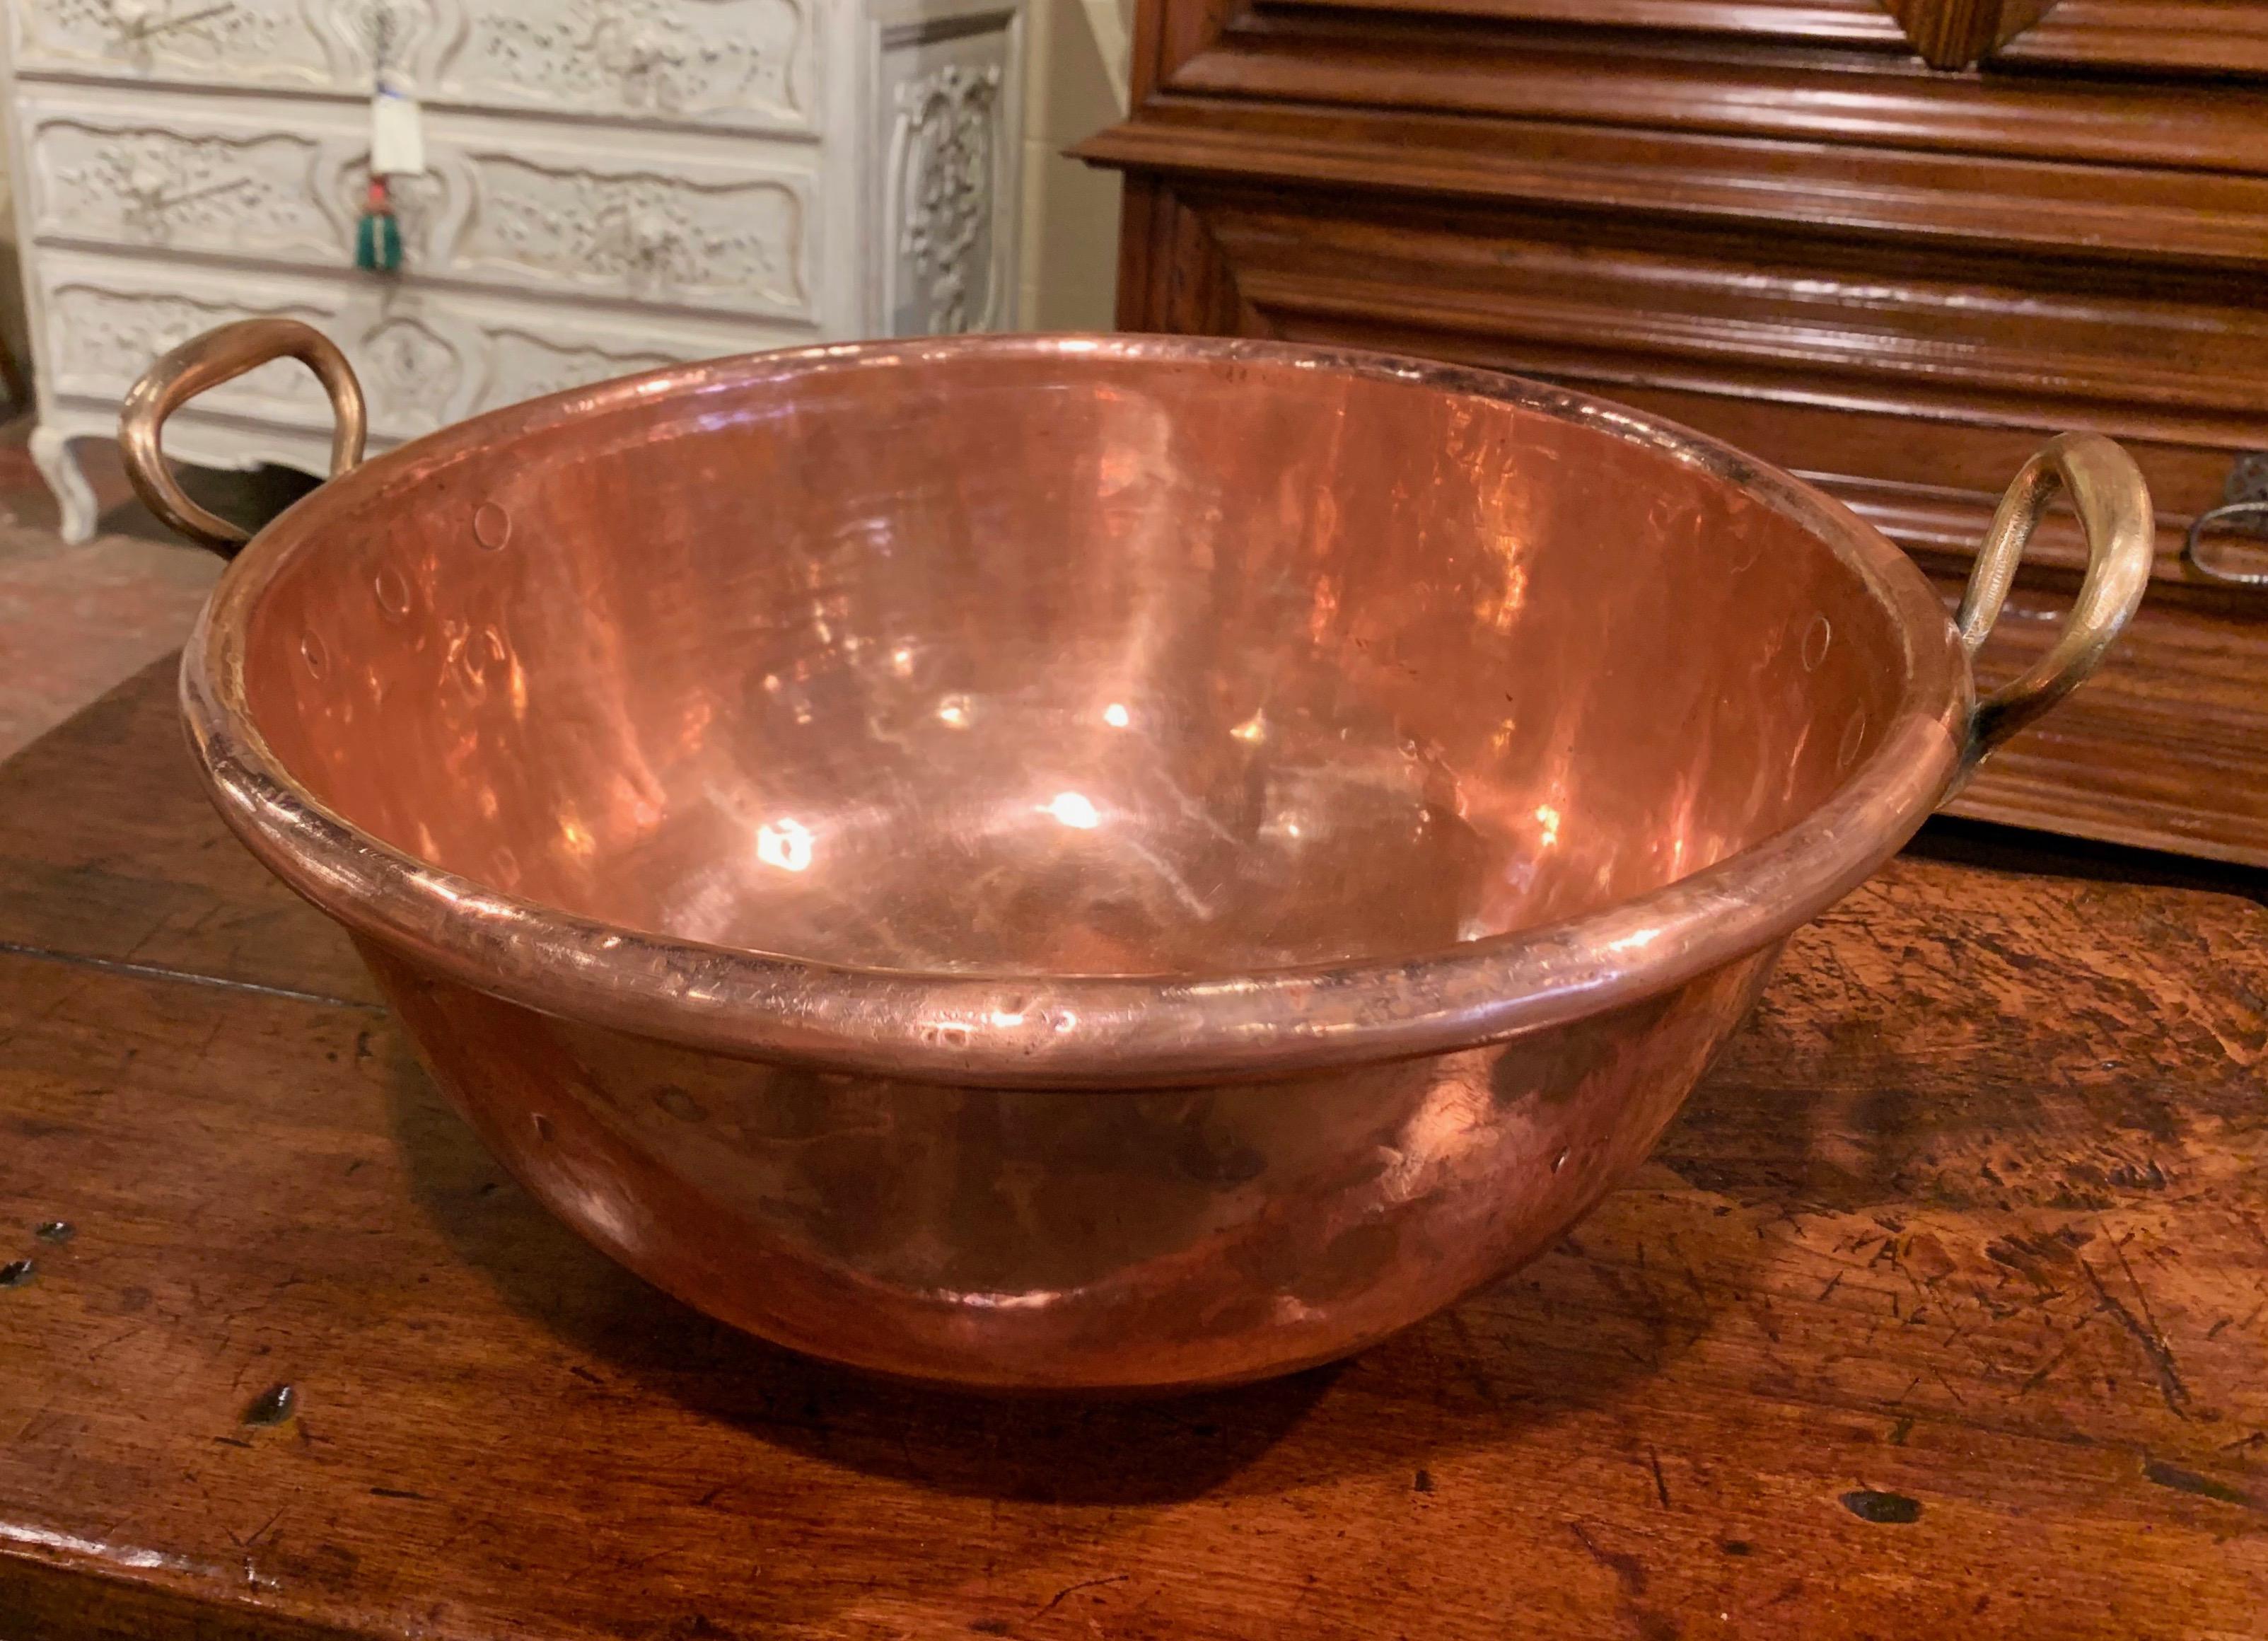 Polished 19th Century French Copper and Bronze Jelly Bowl from Normandy